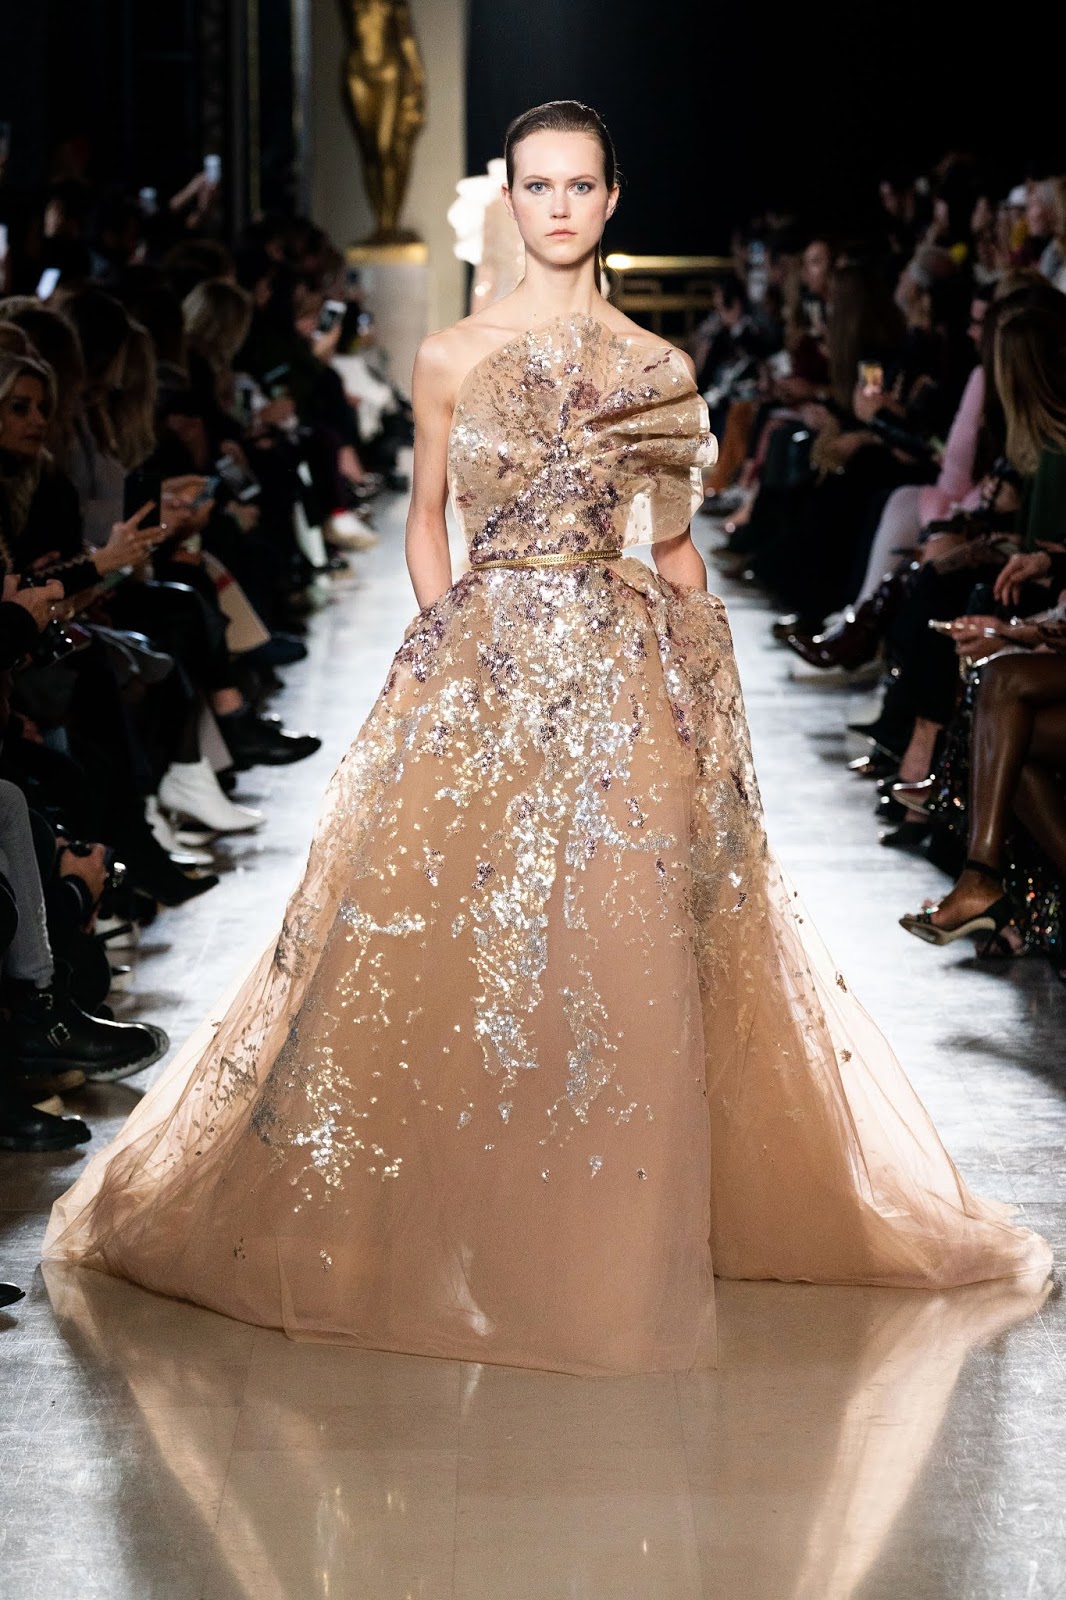 Glimmer and Sparkle: Elie Saab